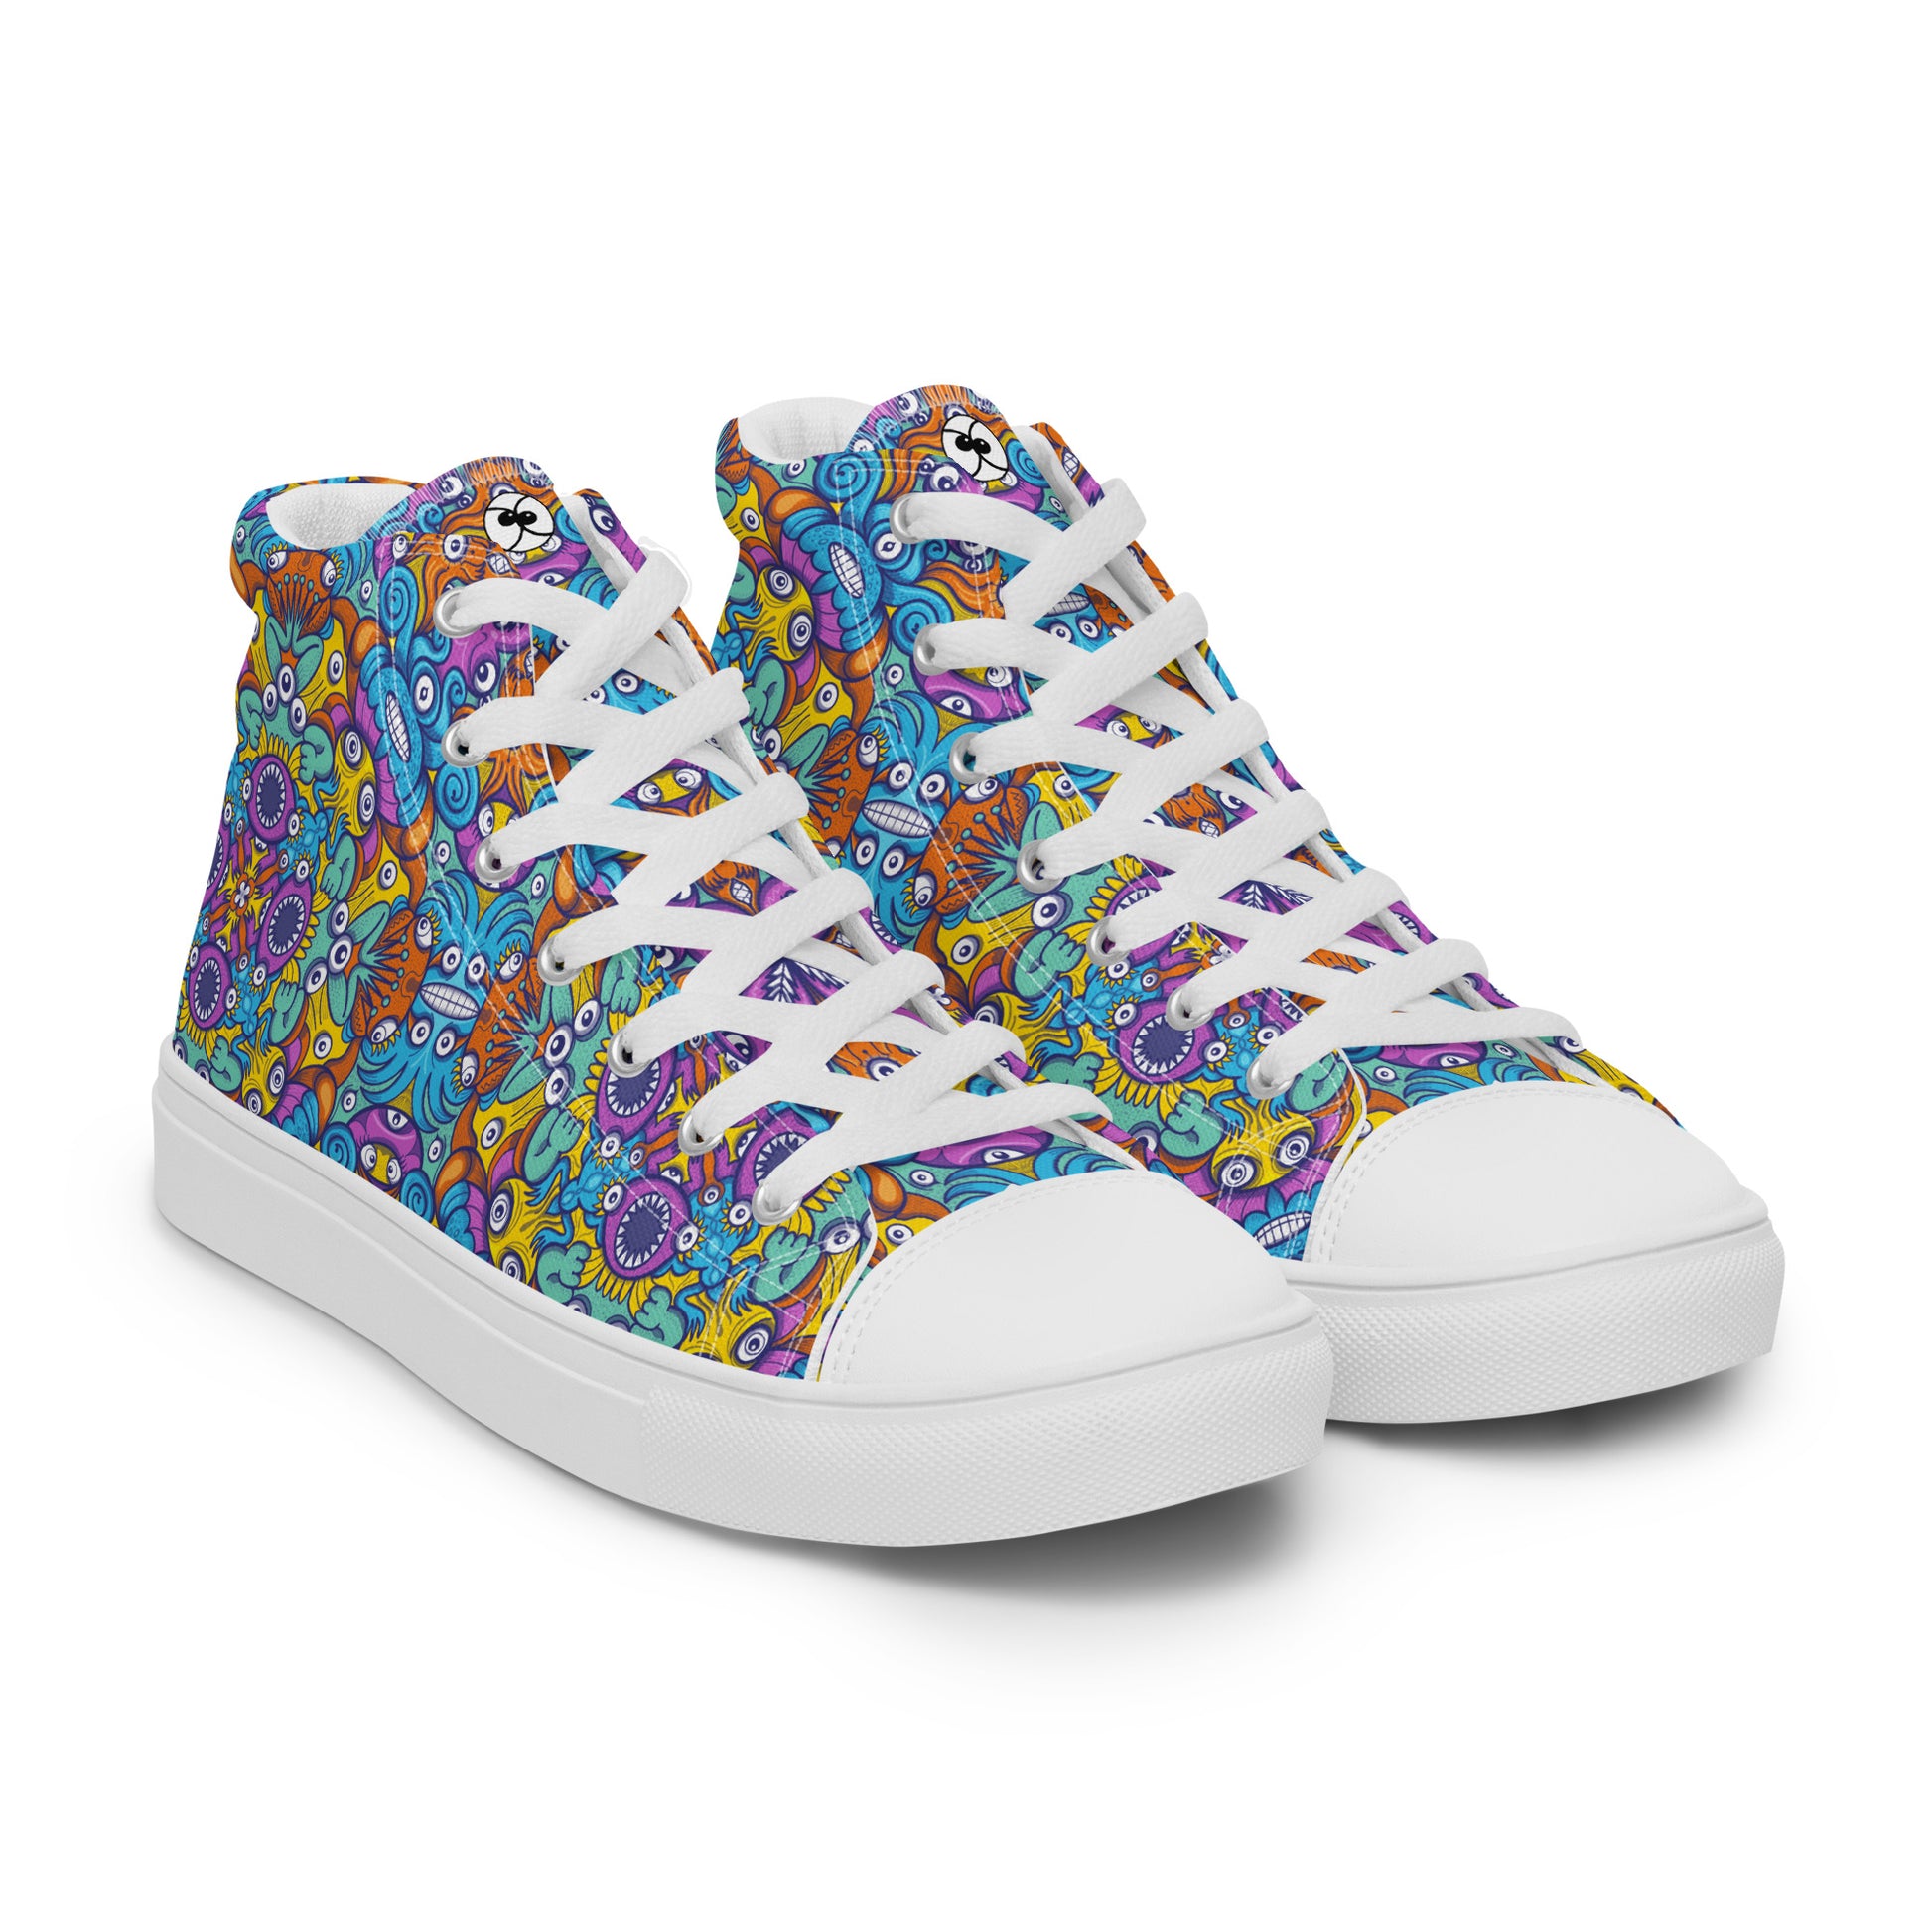 The ultimate sea beasts cast from the deep end of the ocean - Women’s high top canvas shoes. Overview